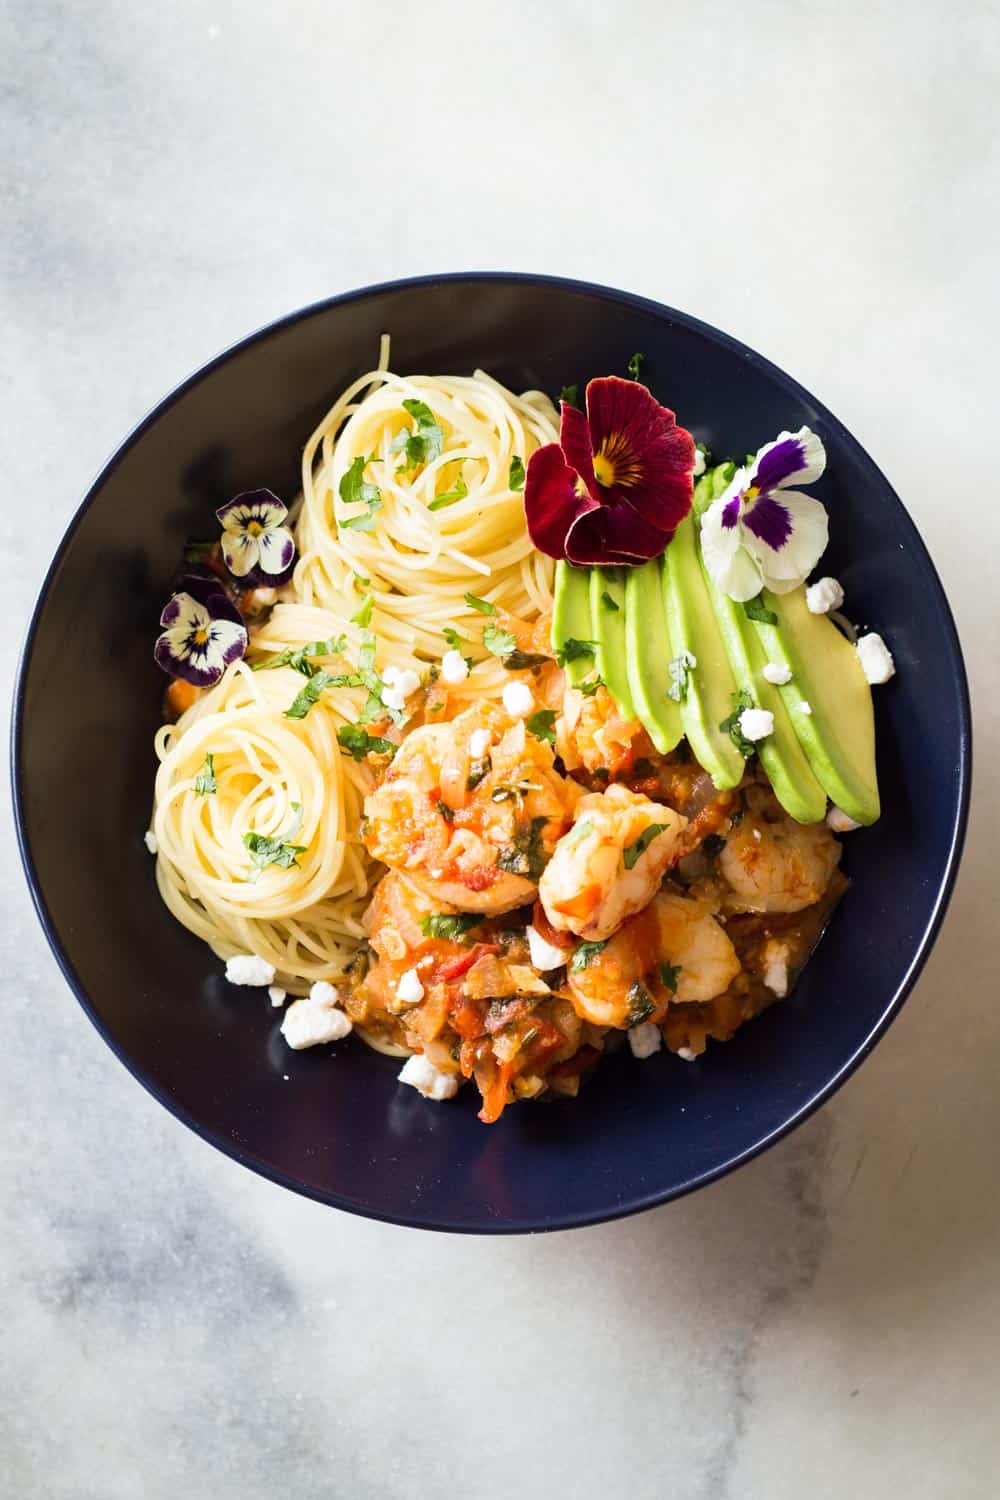 Top view of Mexican-Style Shrimp Capellini Pasta in a black bowl decorated with fresh flowers.